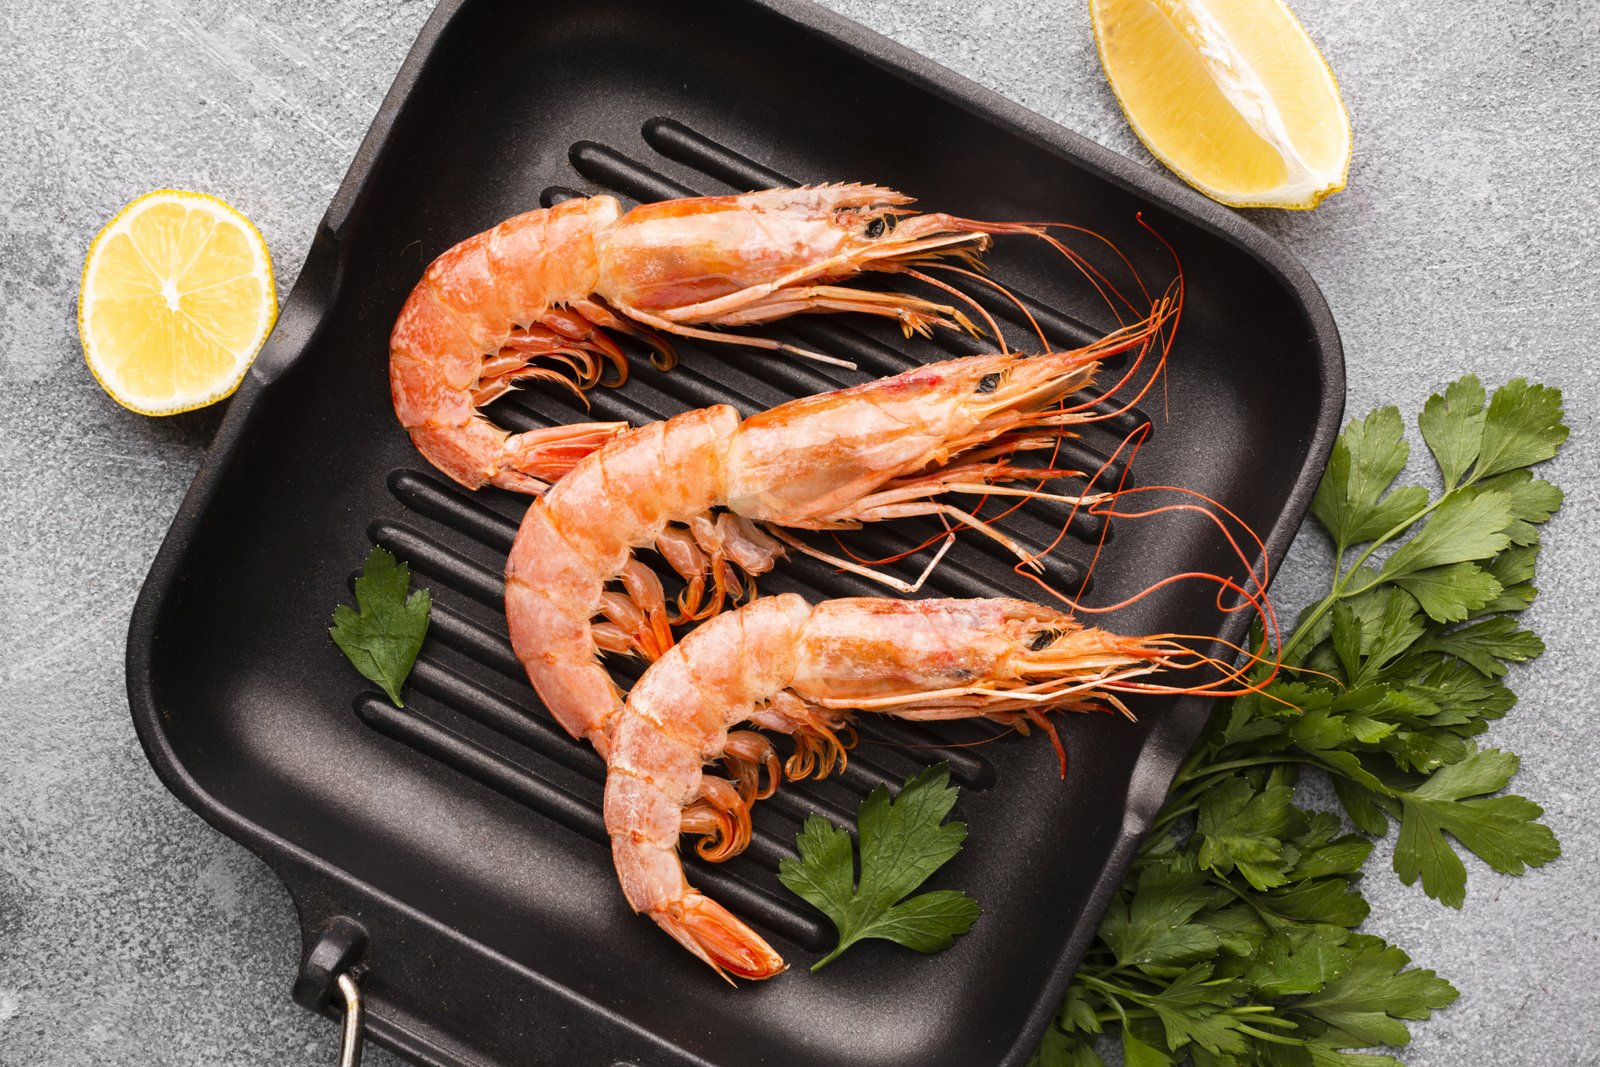 High Seafood Diet Raises Exposure To ‘Forever Chemicals’: Study